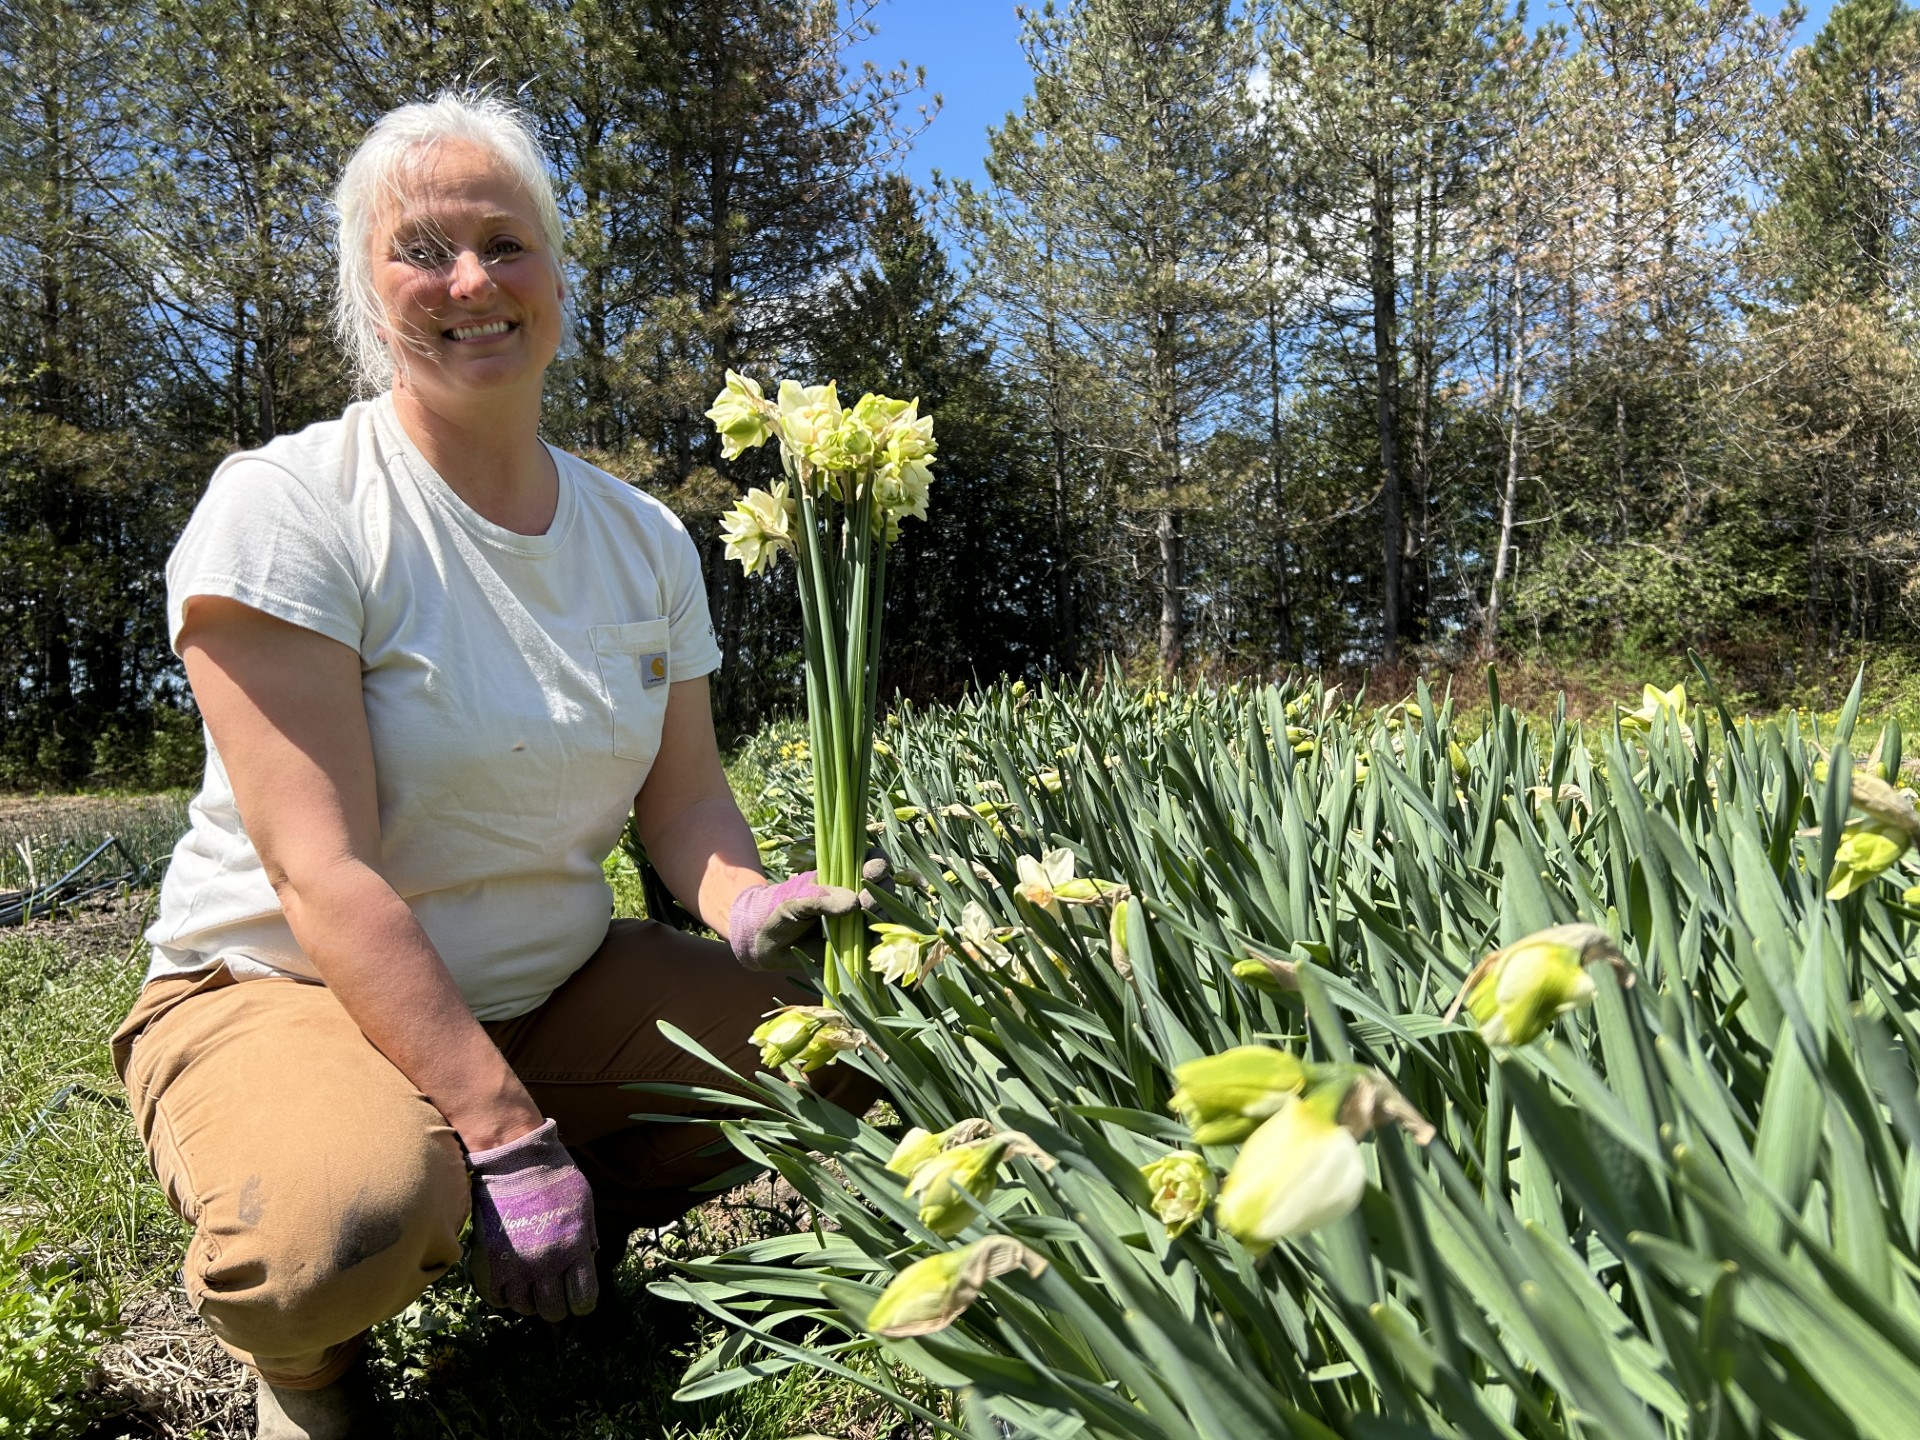 ‘Help farmers’: Quebec flower growers encourage buying local on Mother’s Day